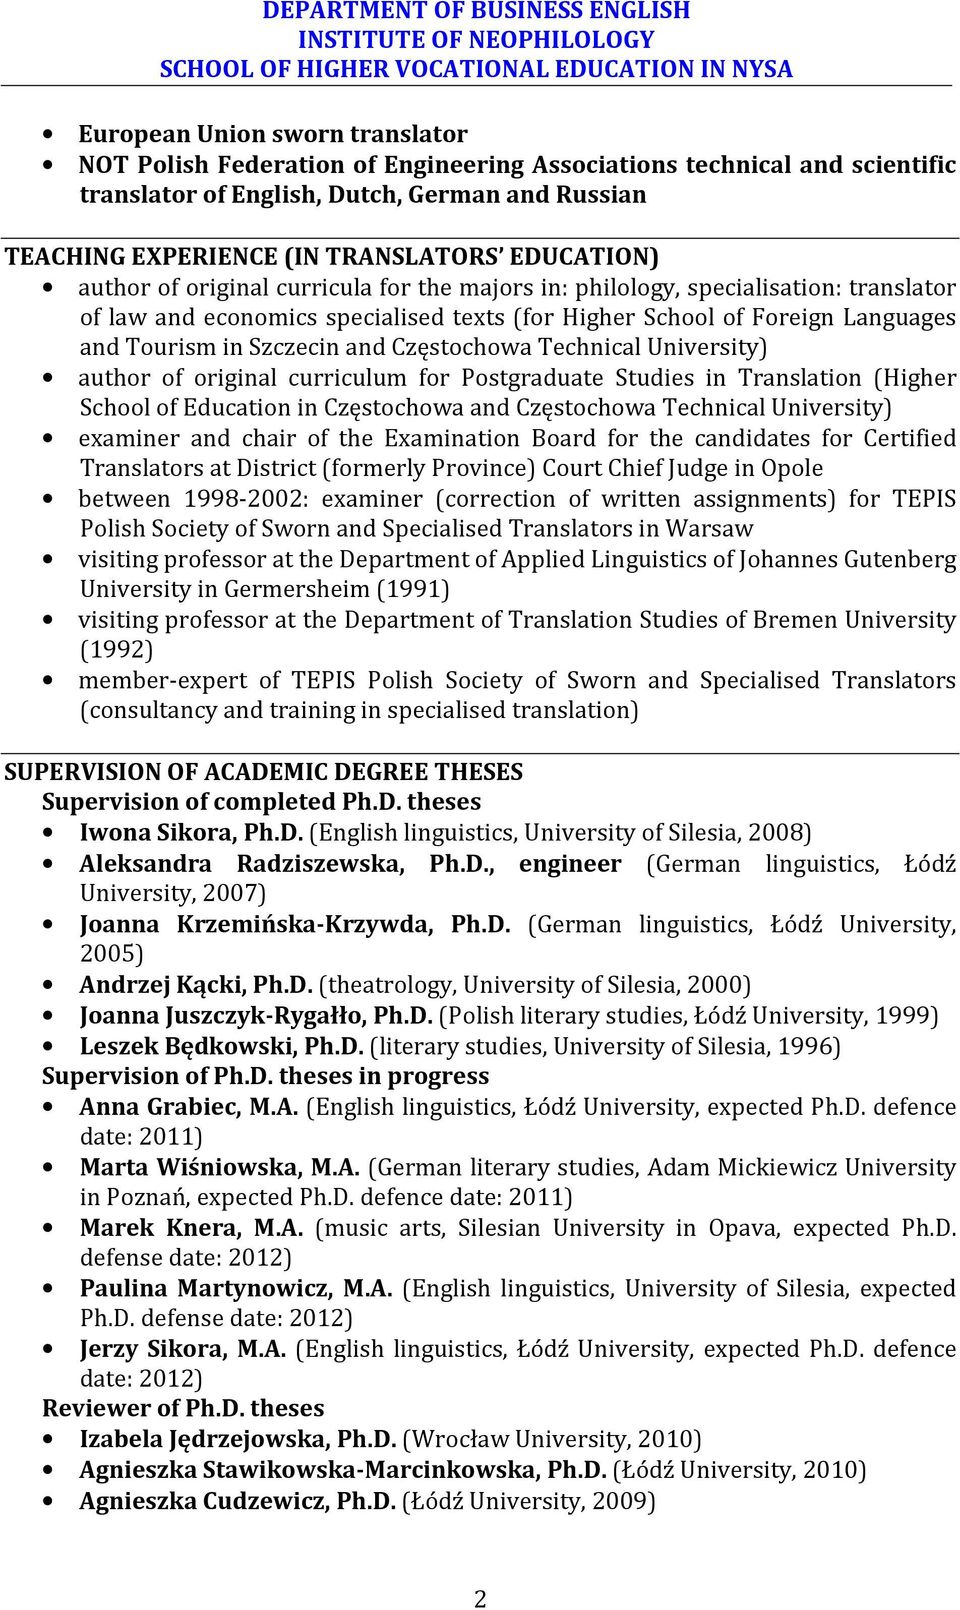 and Częstochowa Technical University) author of original curriculum for Postgraduate Studies in Translation (Higher School of Education in Częstochowa and Częstochowa Technical University) examiner